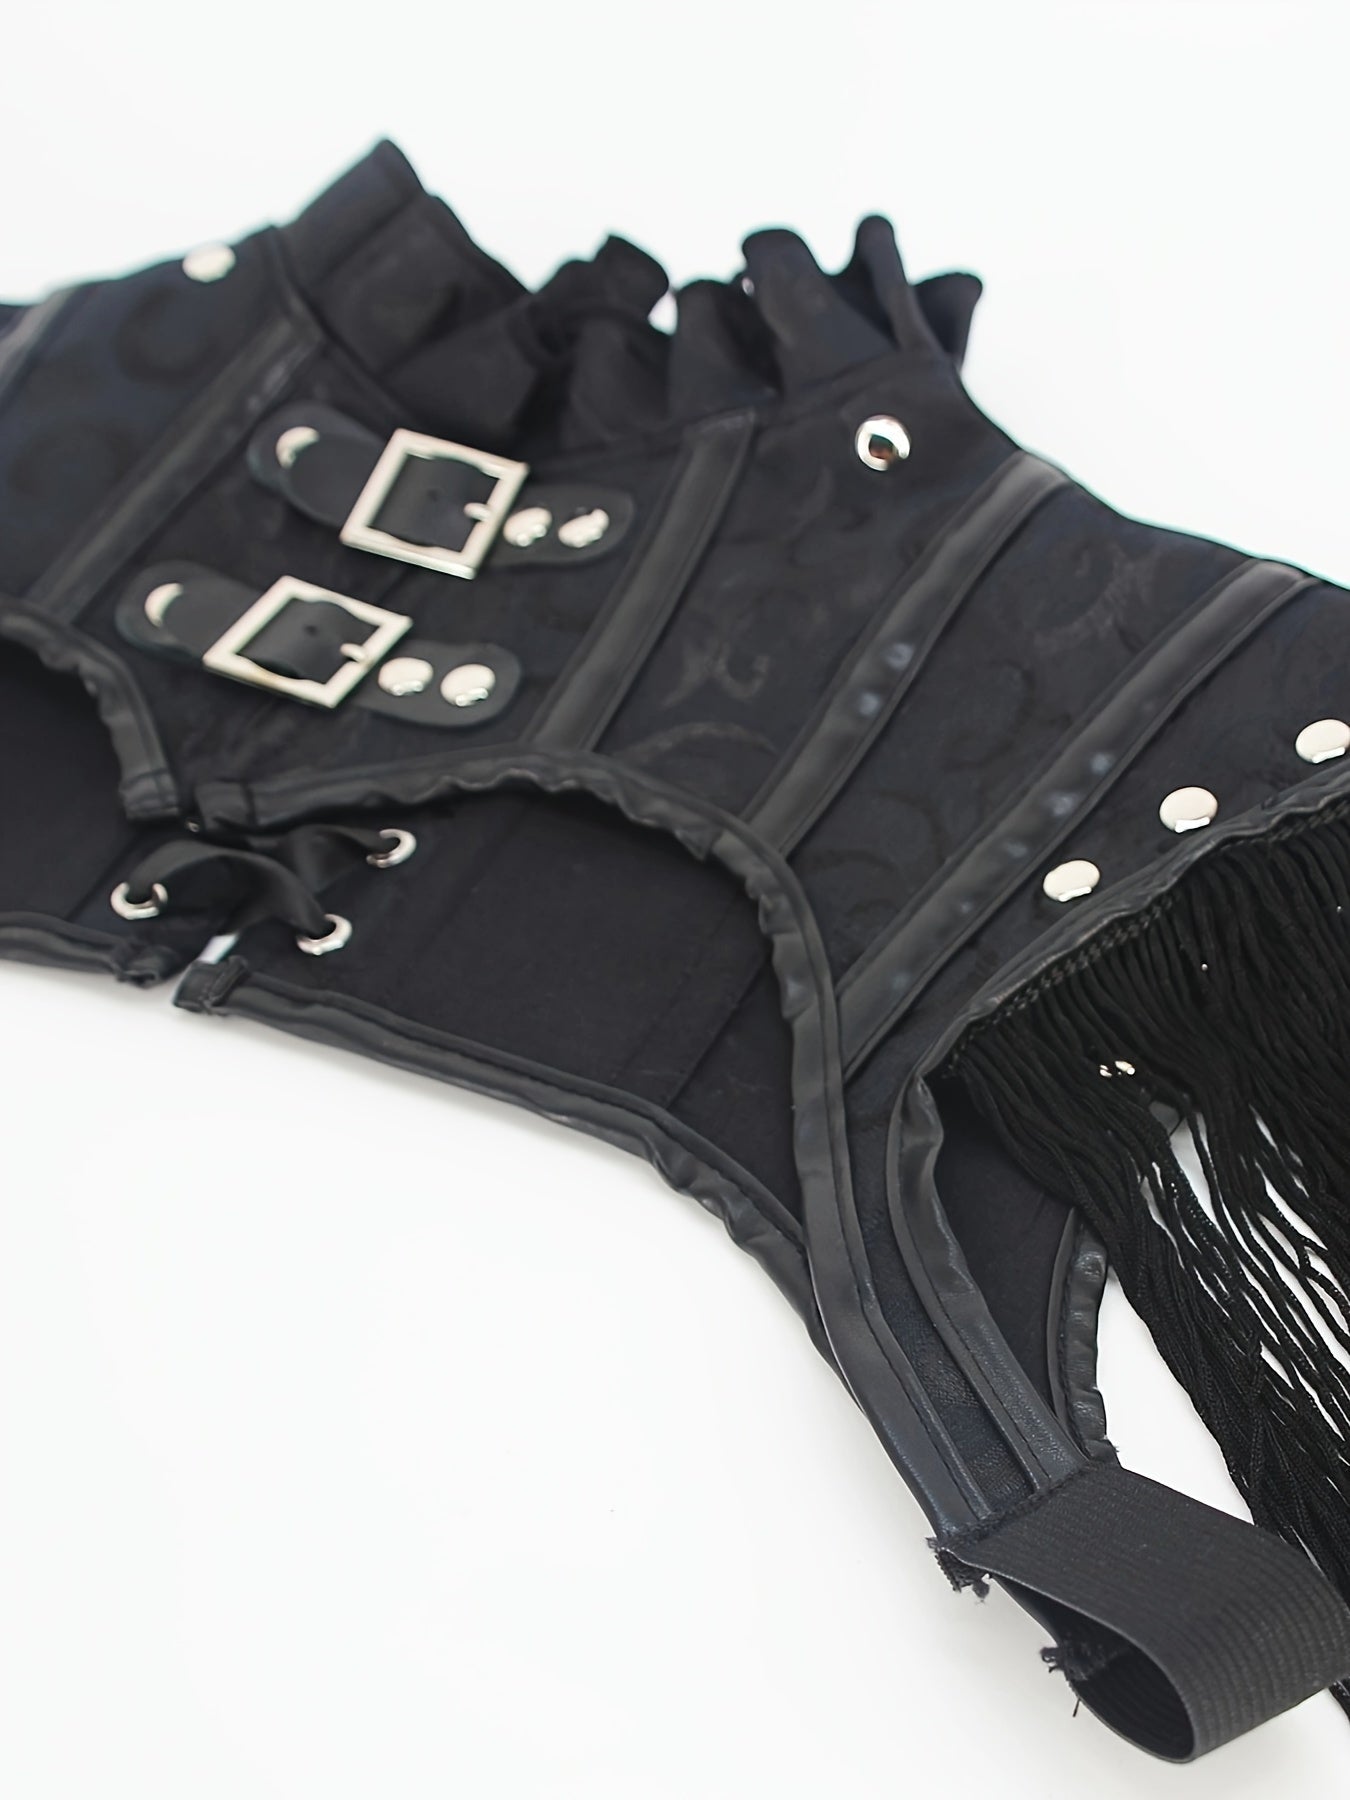 Black steampunk-style Fringe Hem Ruffle Trim Crop Top, Punk Mock Neck Buckle Lace Up Shrug, Women's Clothing from Maramalive™ with silver buckles, lace-up details, and fringe accents, featuring a stand collar and double button design, laid flat on a white background.